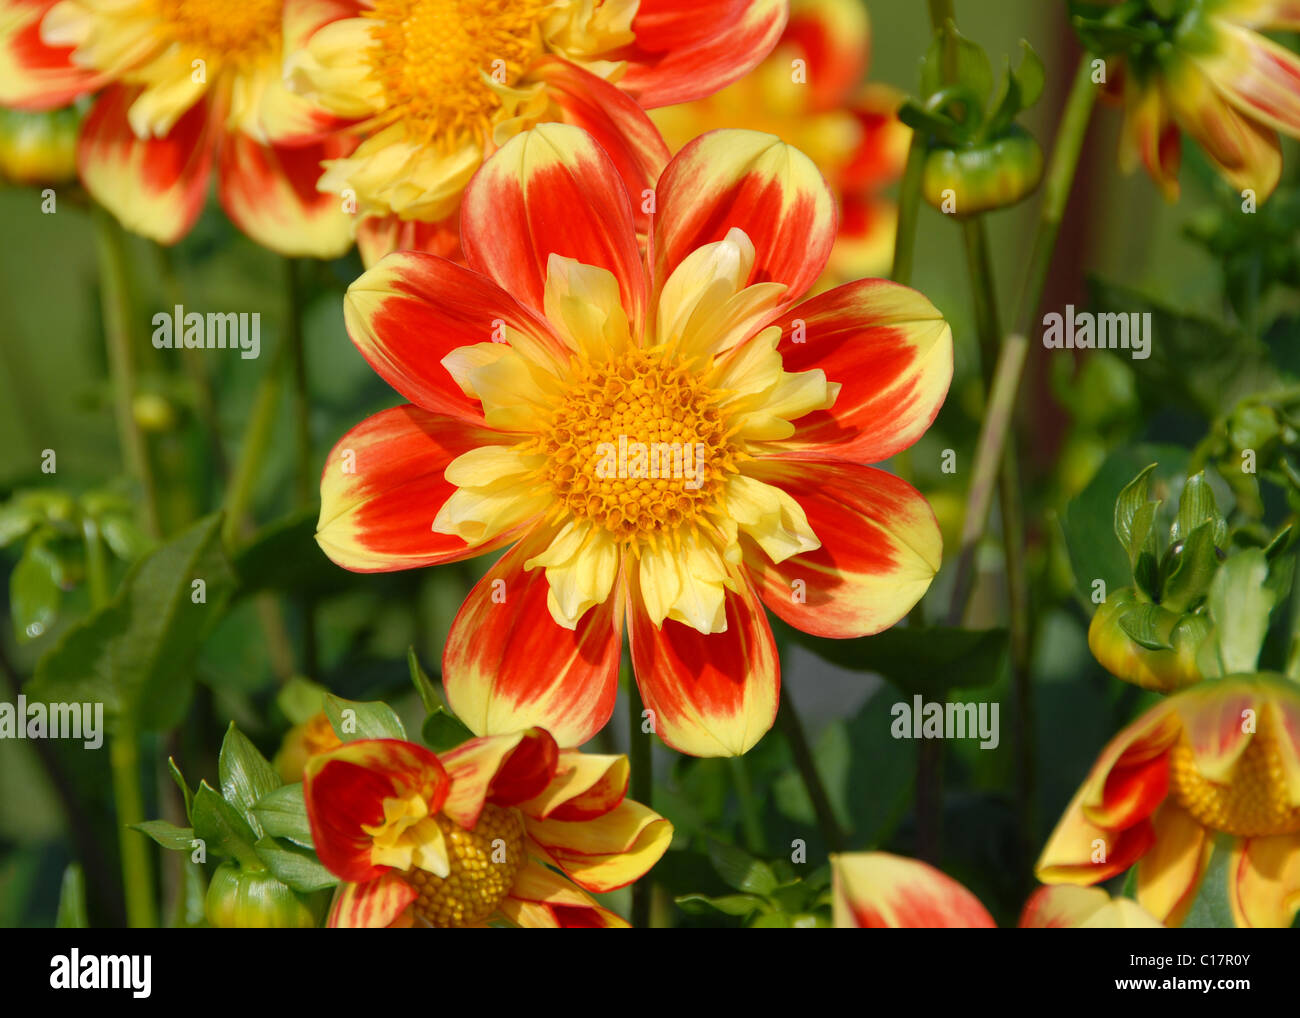 red and yellow collerette bedding Dahlia 'Pooh' Stock Photo